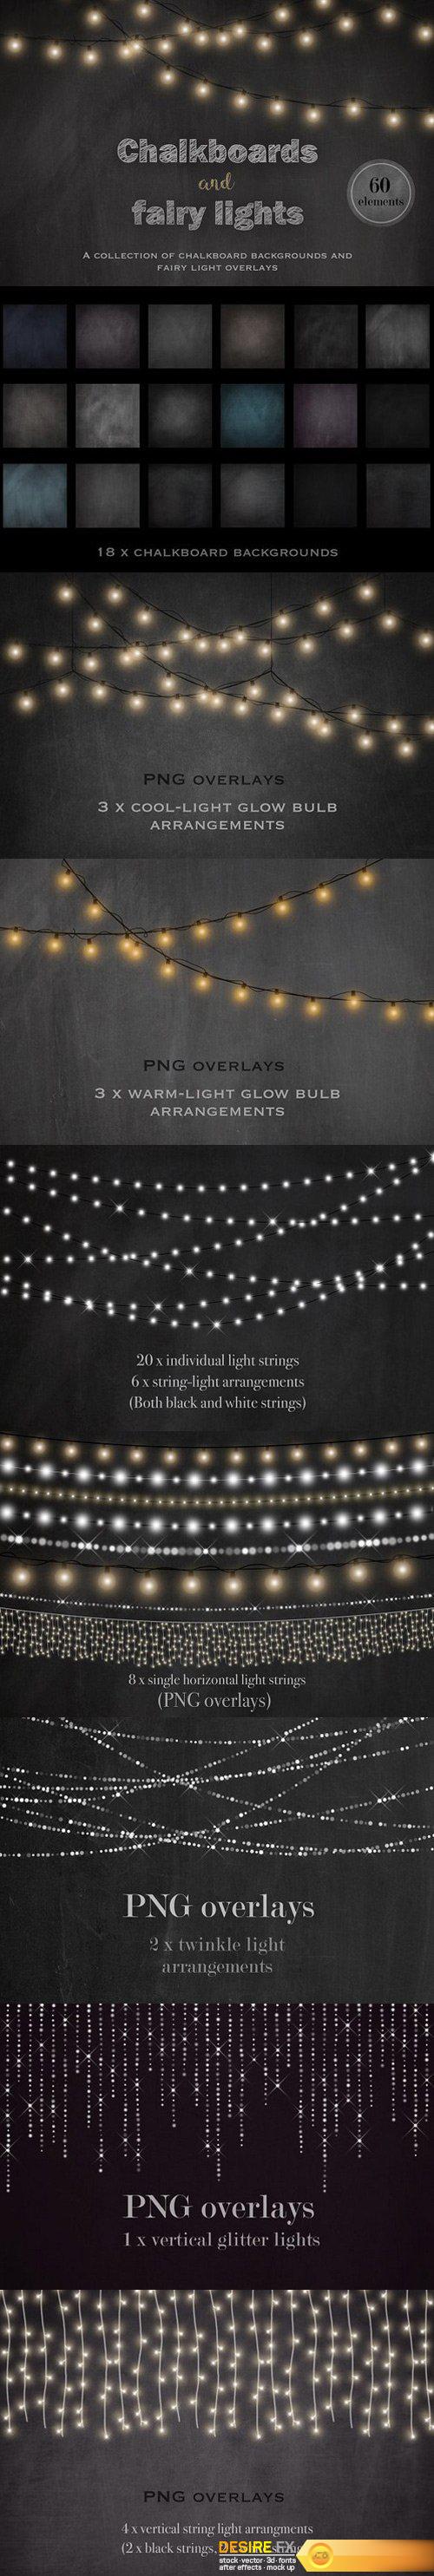 CM - Chalkboards and fairy lights 1482204